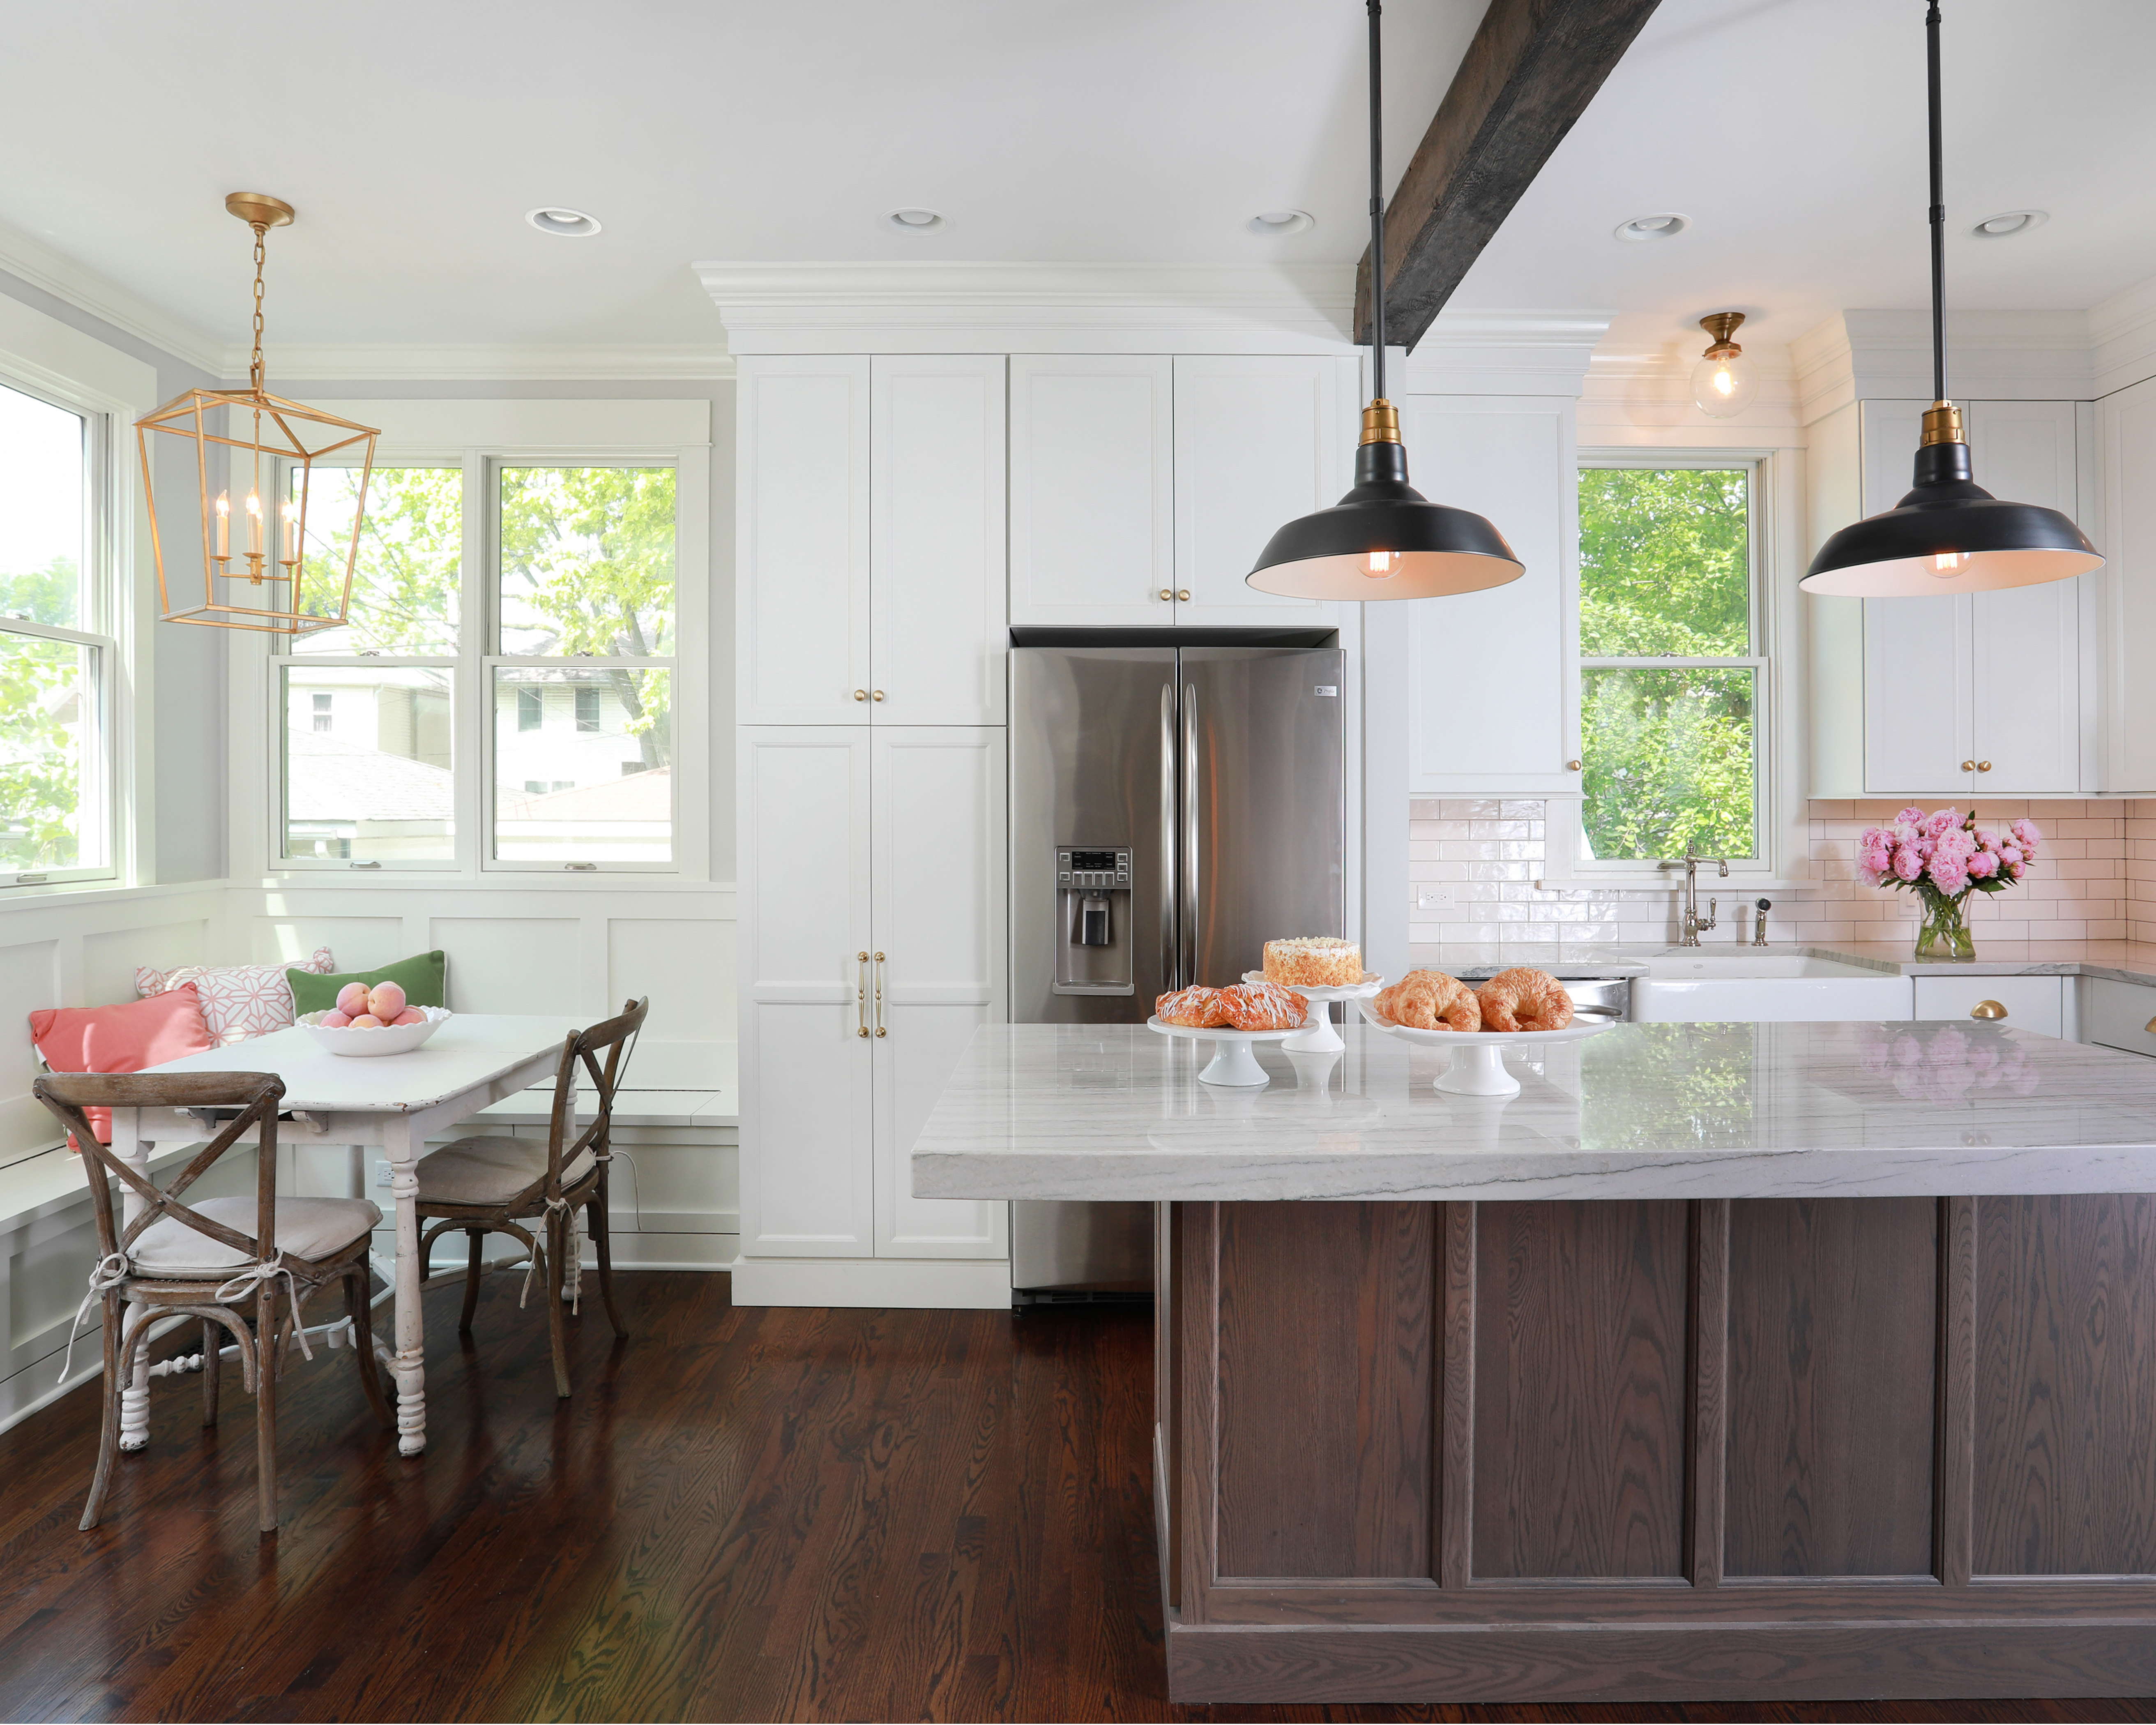 White kitchen cabinets with distressed wood island cabinet and reclaimed wood beams